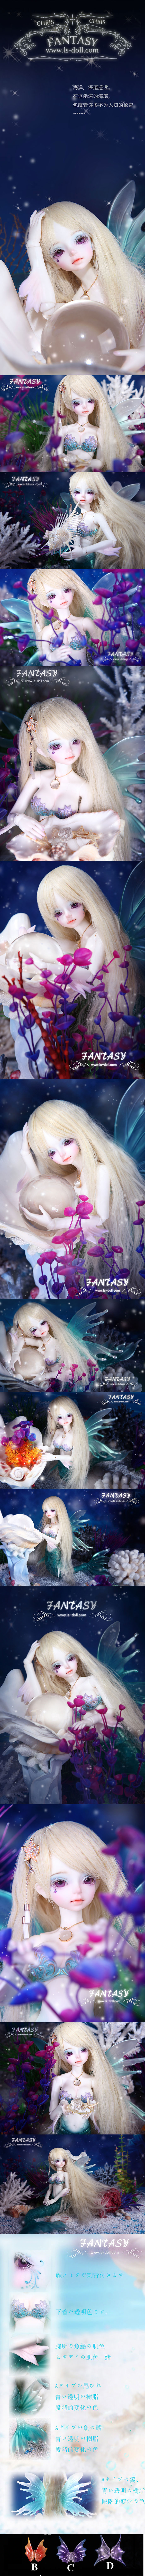 BJD Siren - Chris Limited(60sets) Girl Boll-jointed doll